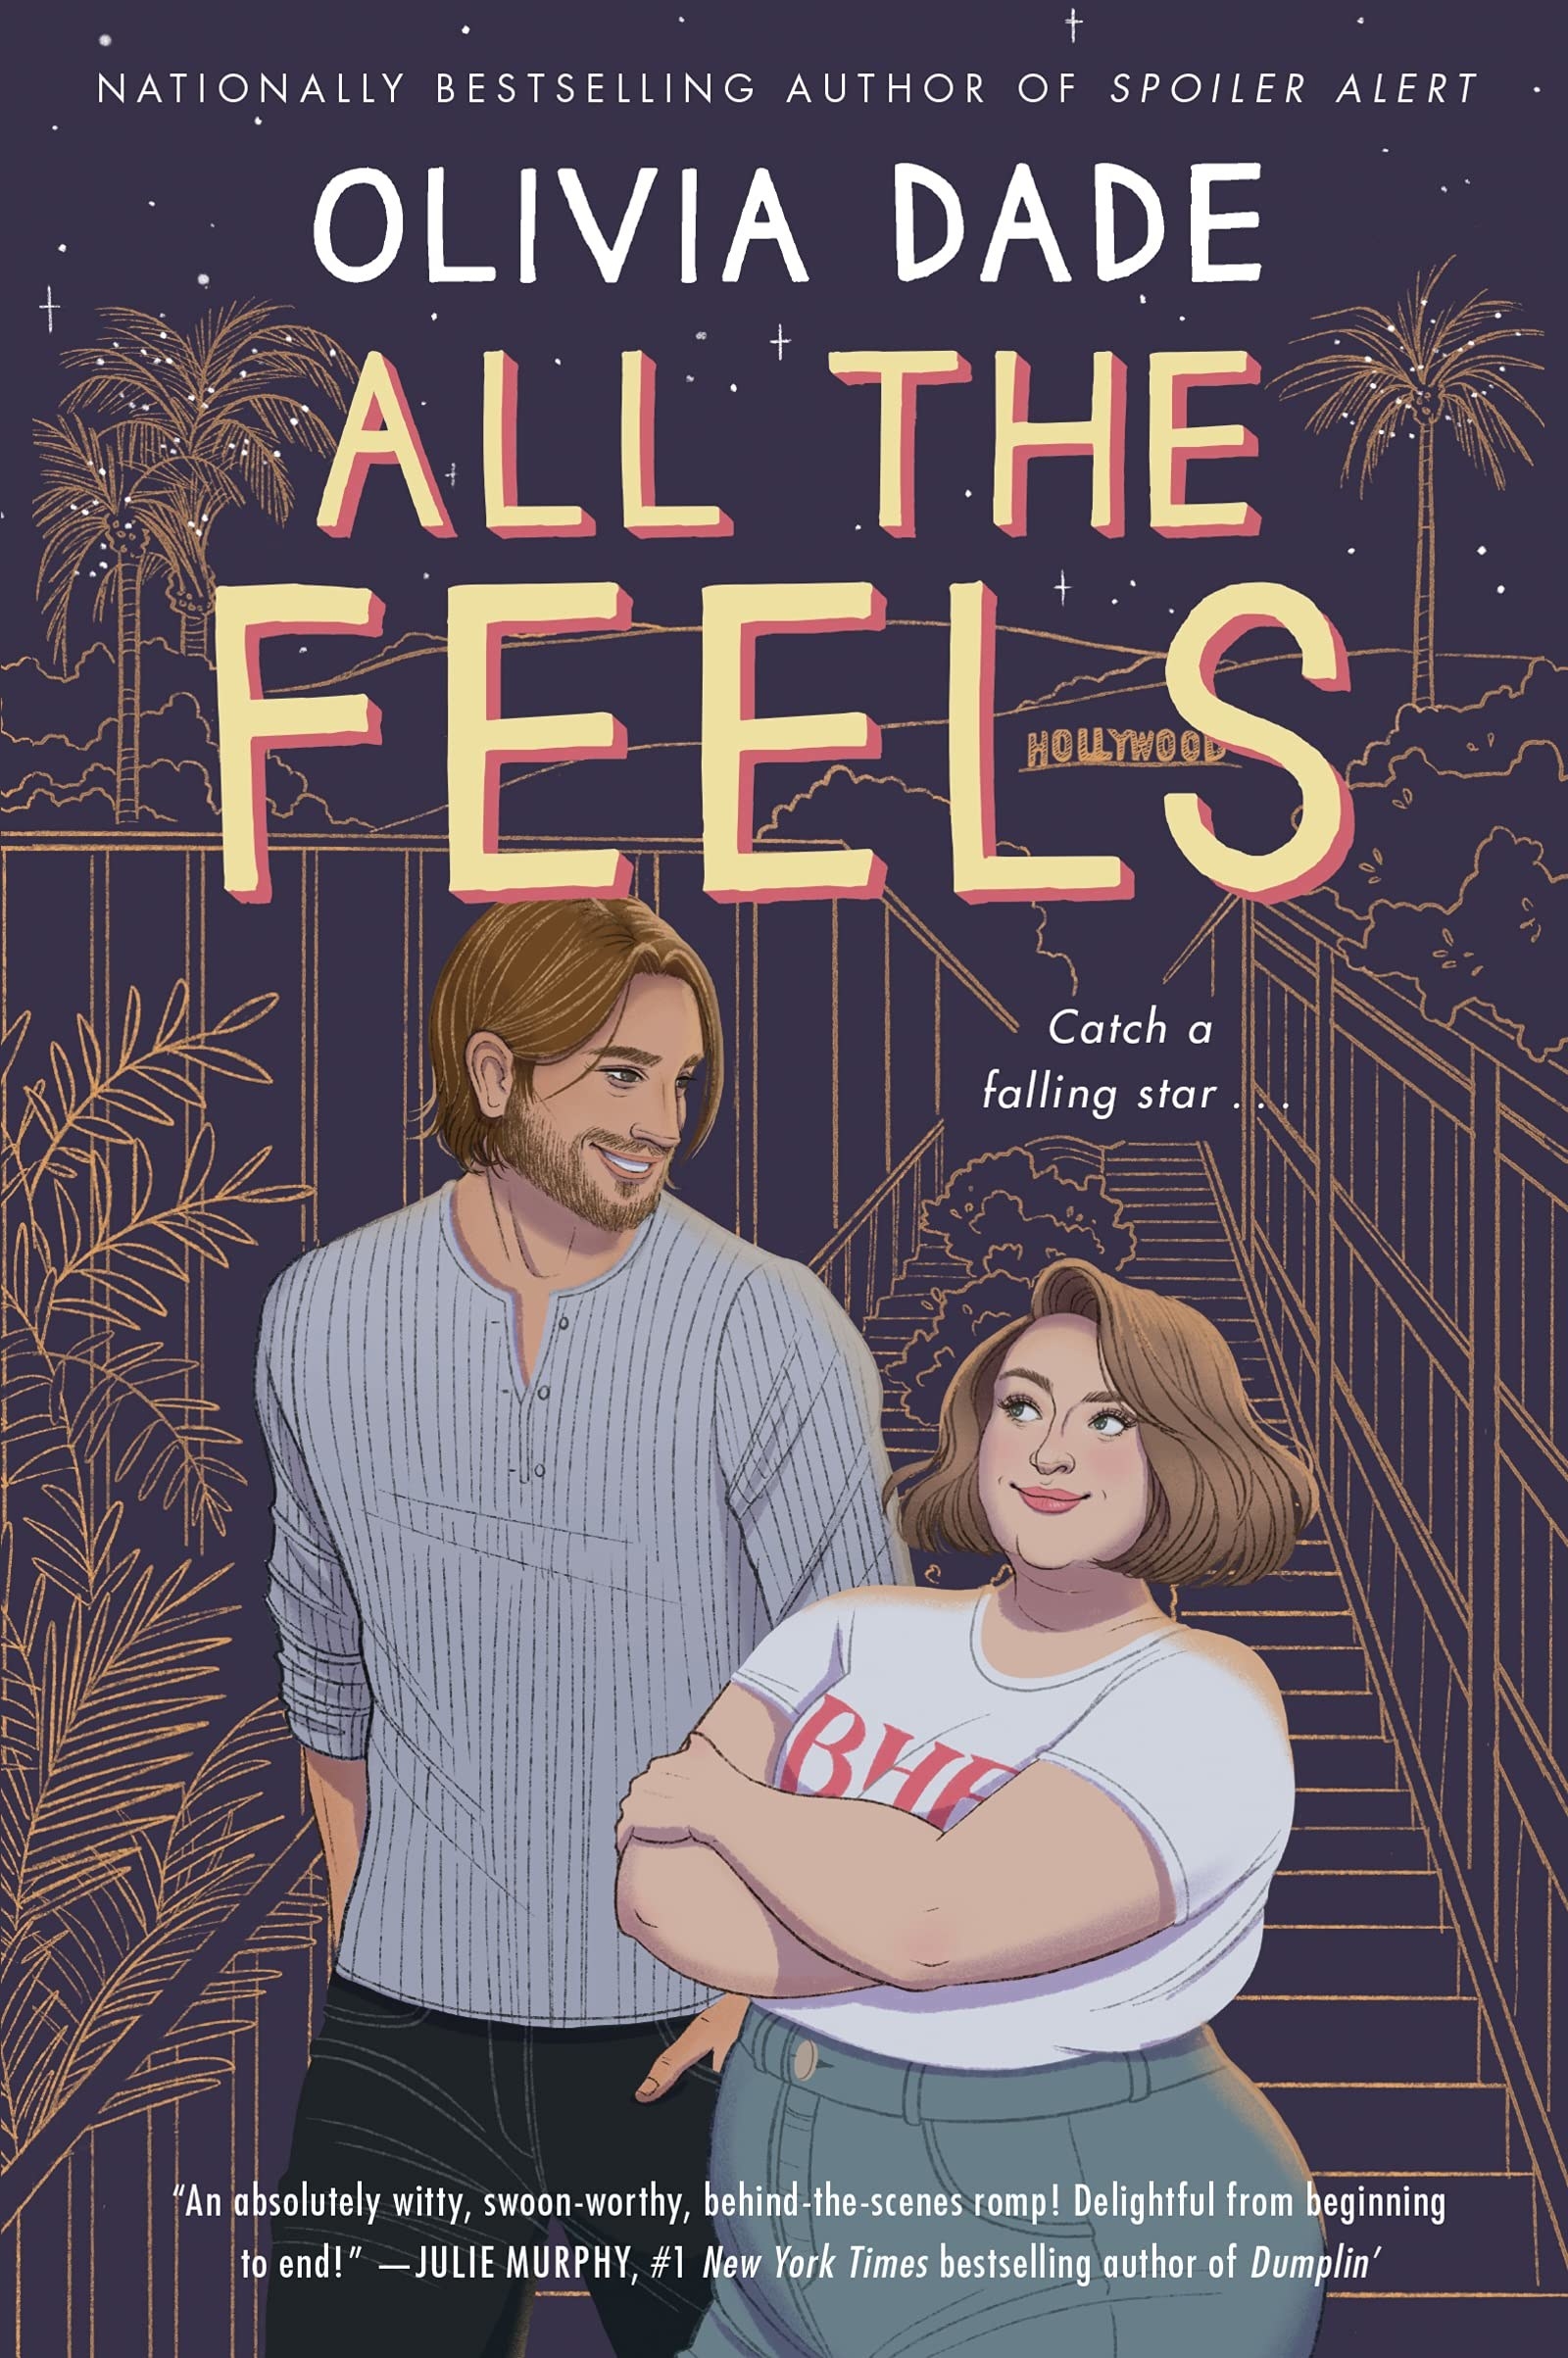 All the Feels book cover. Book by Olivia Dade